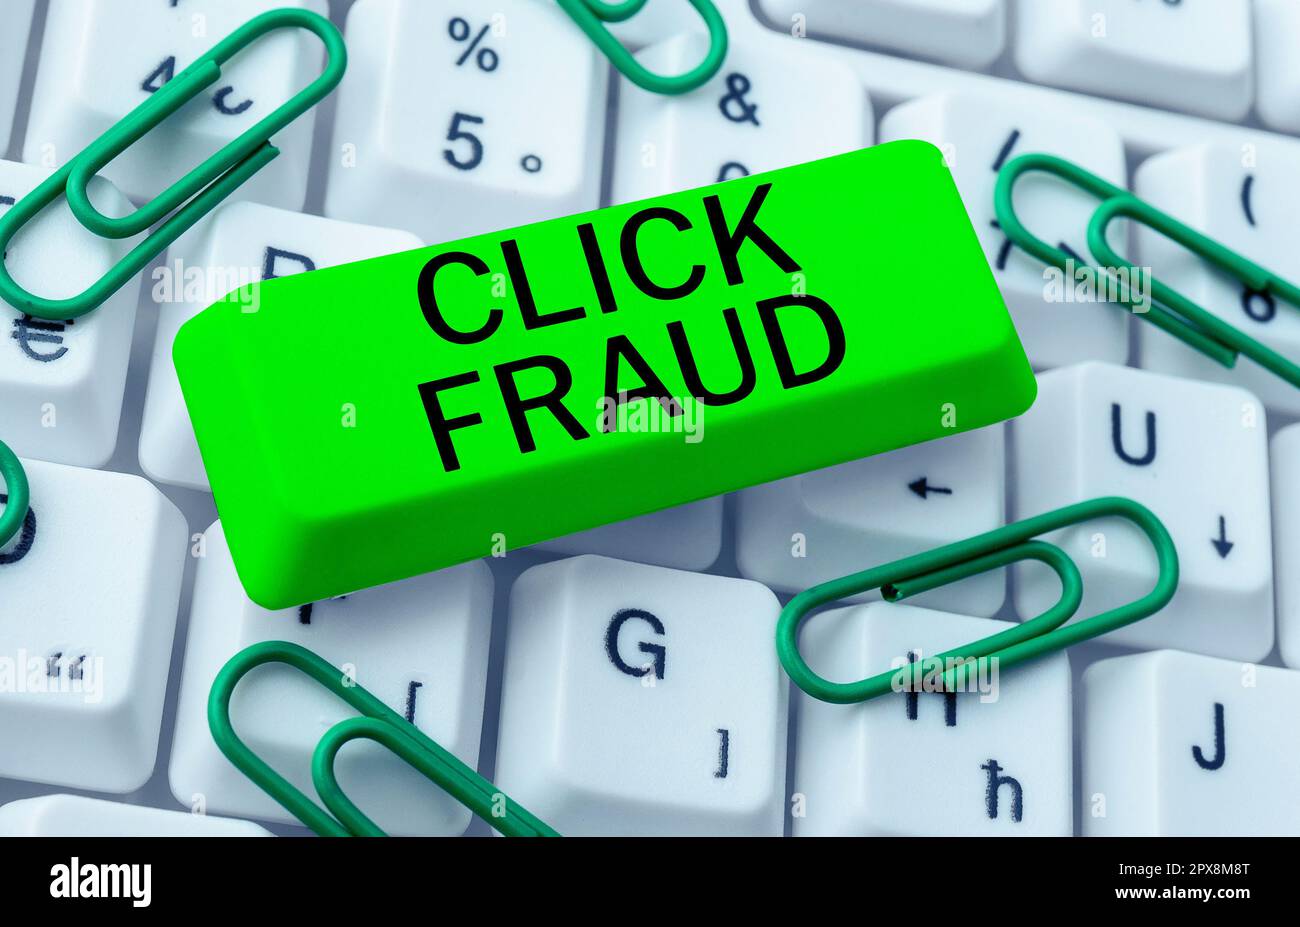 Hand writing sign Click Fraud, Business approach practice of repeatedly clicking on advertisement hosted website Stock Photo